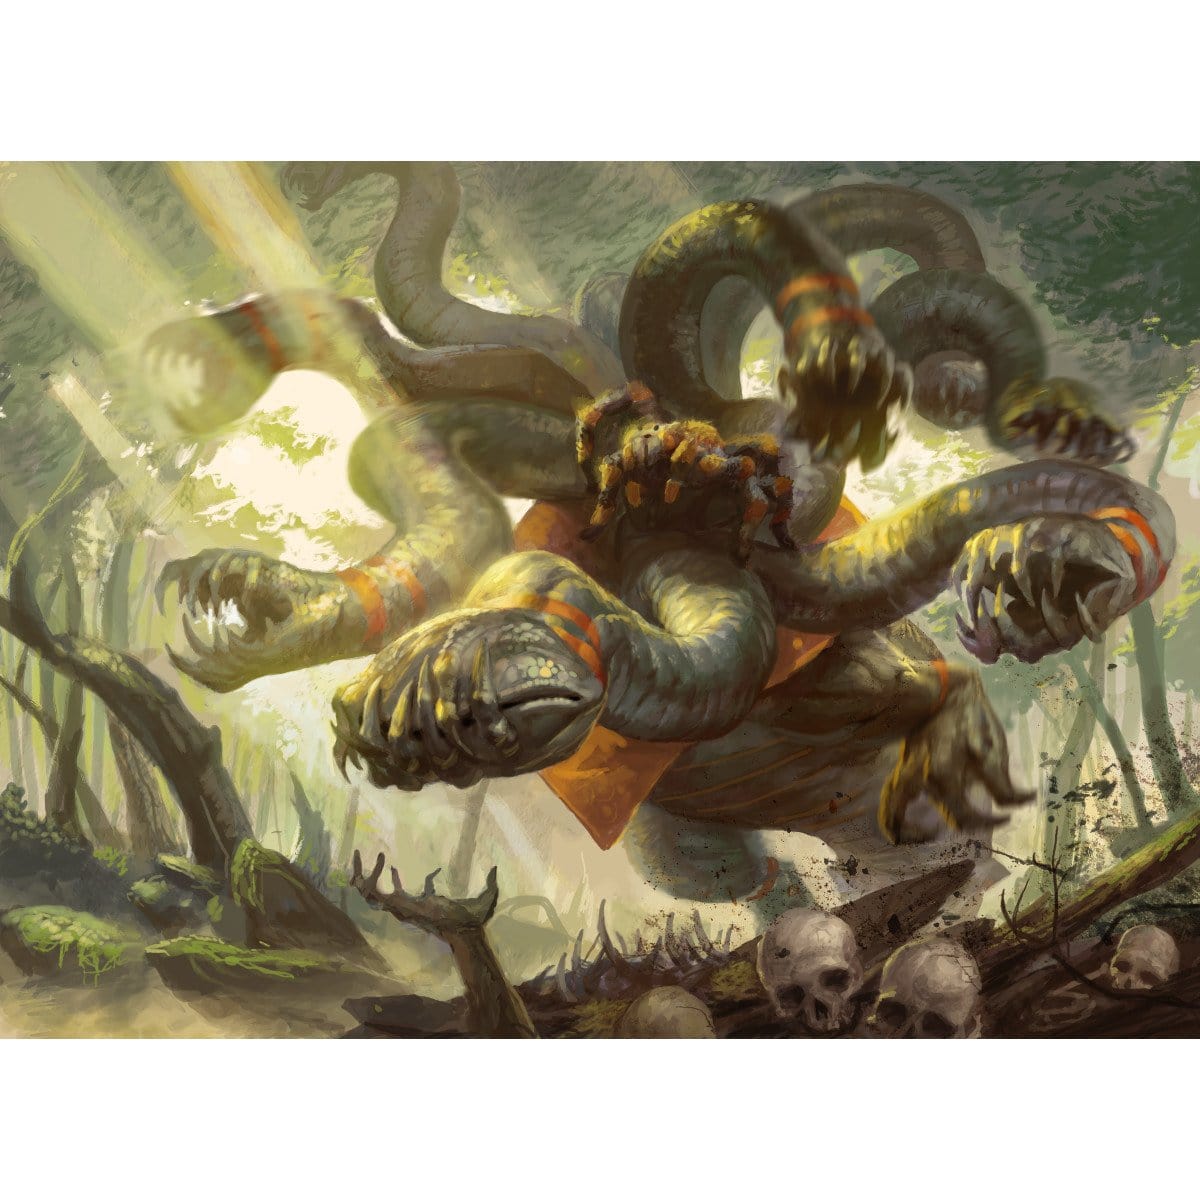 Genesis Hydra Print - Print - Original Magic Art - Accessories for Magic the Gathering and other card games